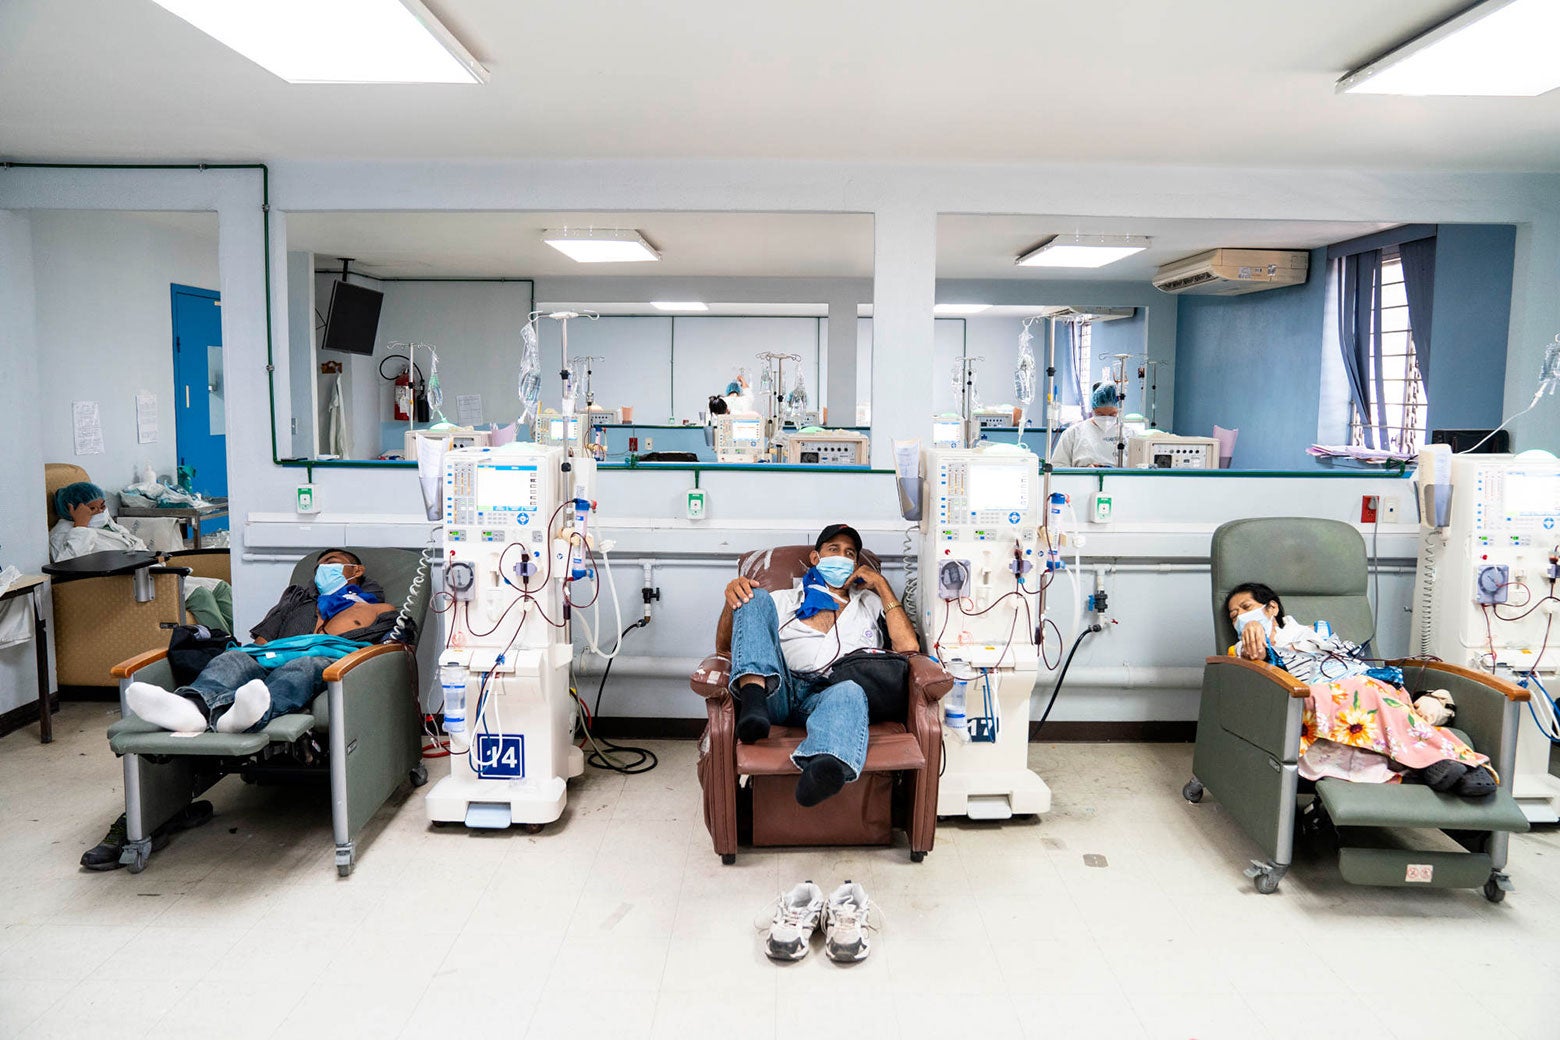 Three male patients recline in hospital chairs, hooked up to dialysis machines.